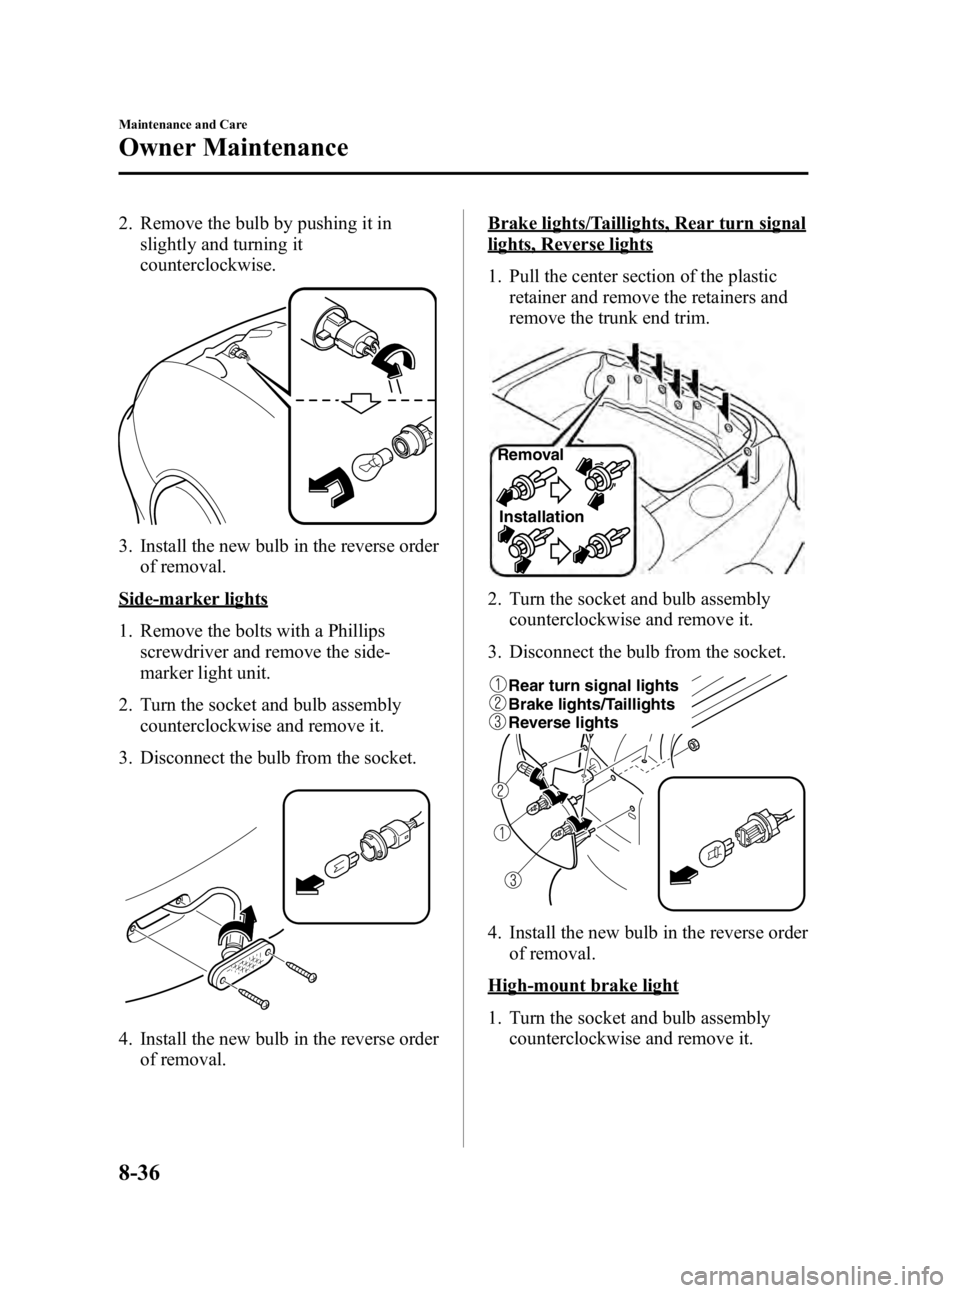 MAZDA MODEL MX-5 MIATA 2005  Owners Manual Black plate (252,1)
2. Remove the bulb by pushing it inslightly and turning it
counterclockwise.
3. Install the new bulb in the reverse orderof removal.
Side-marker lights
1. Remove the bolts with a P